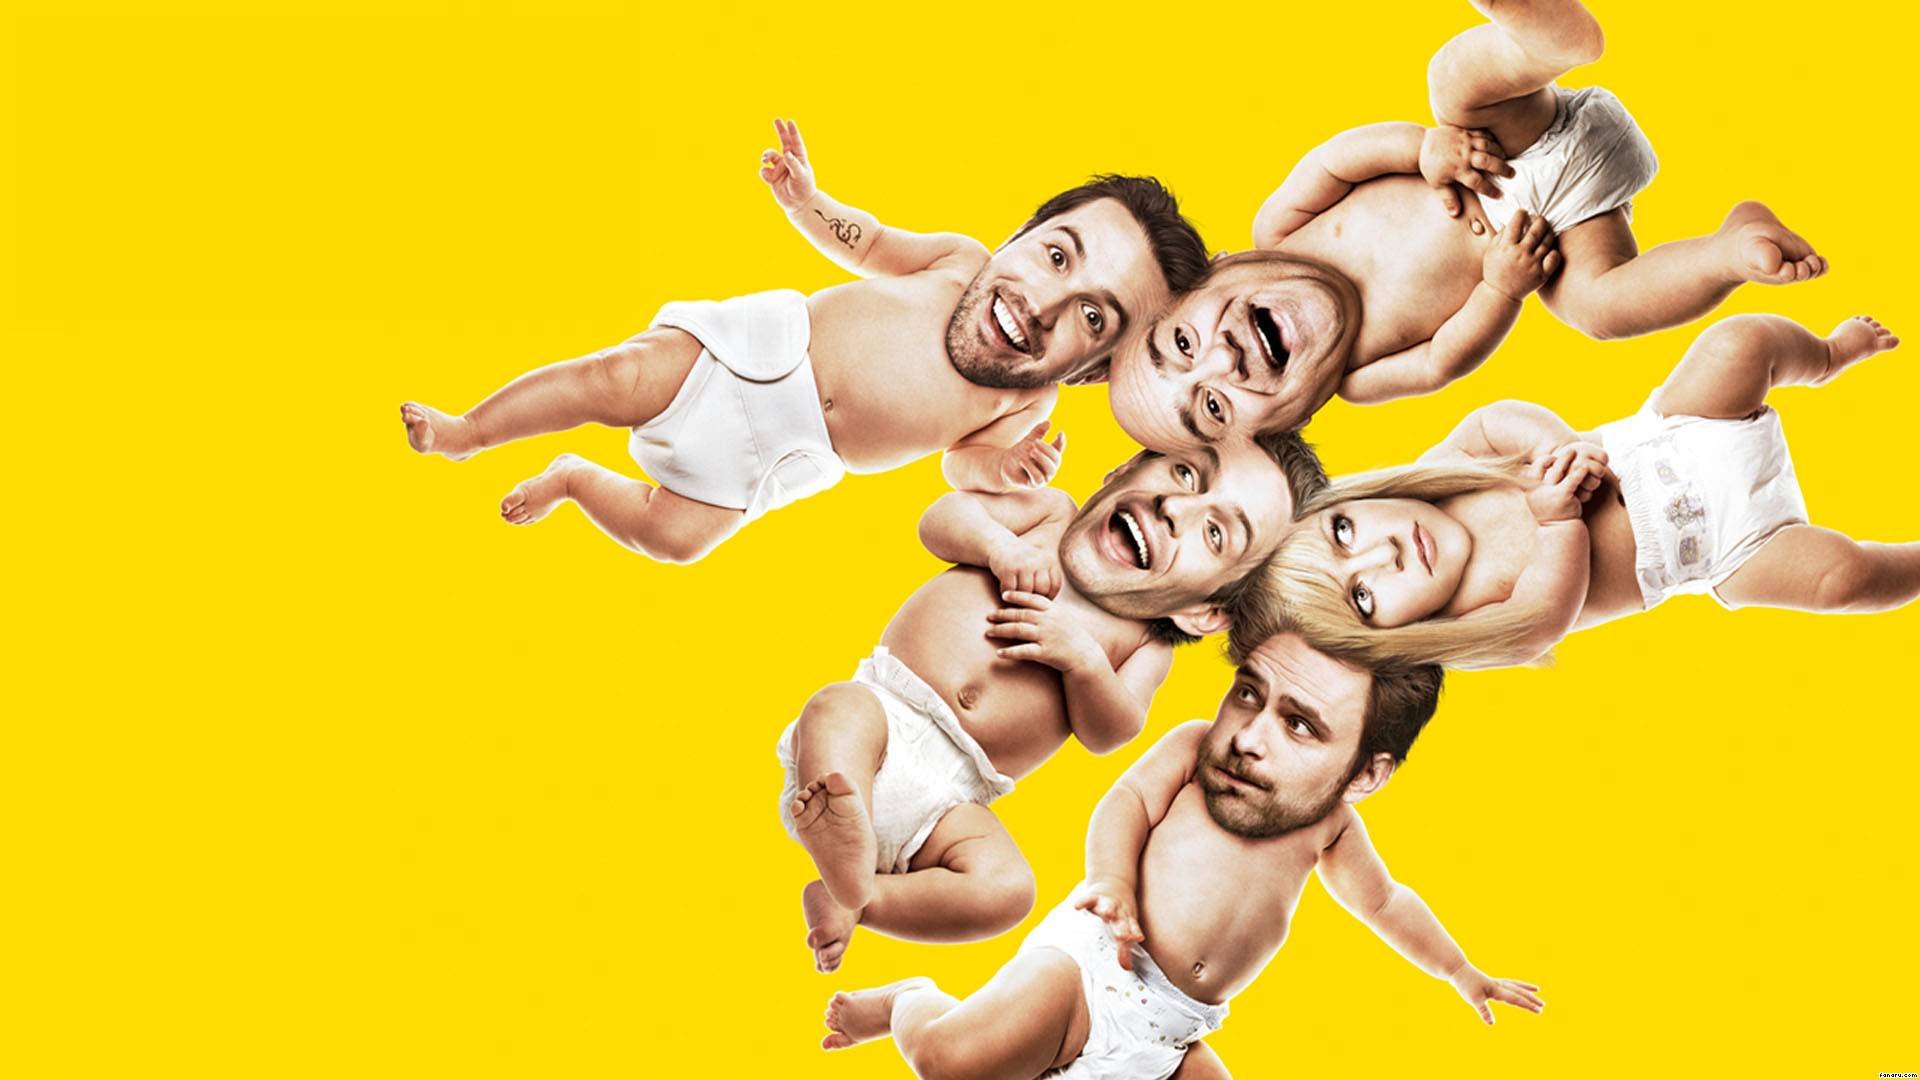 its always sunny in philadelphia, Comedy, Sitcom, Television, Series, Alway...